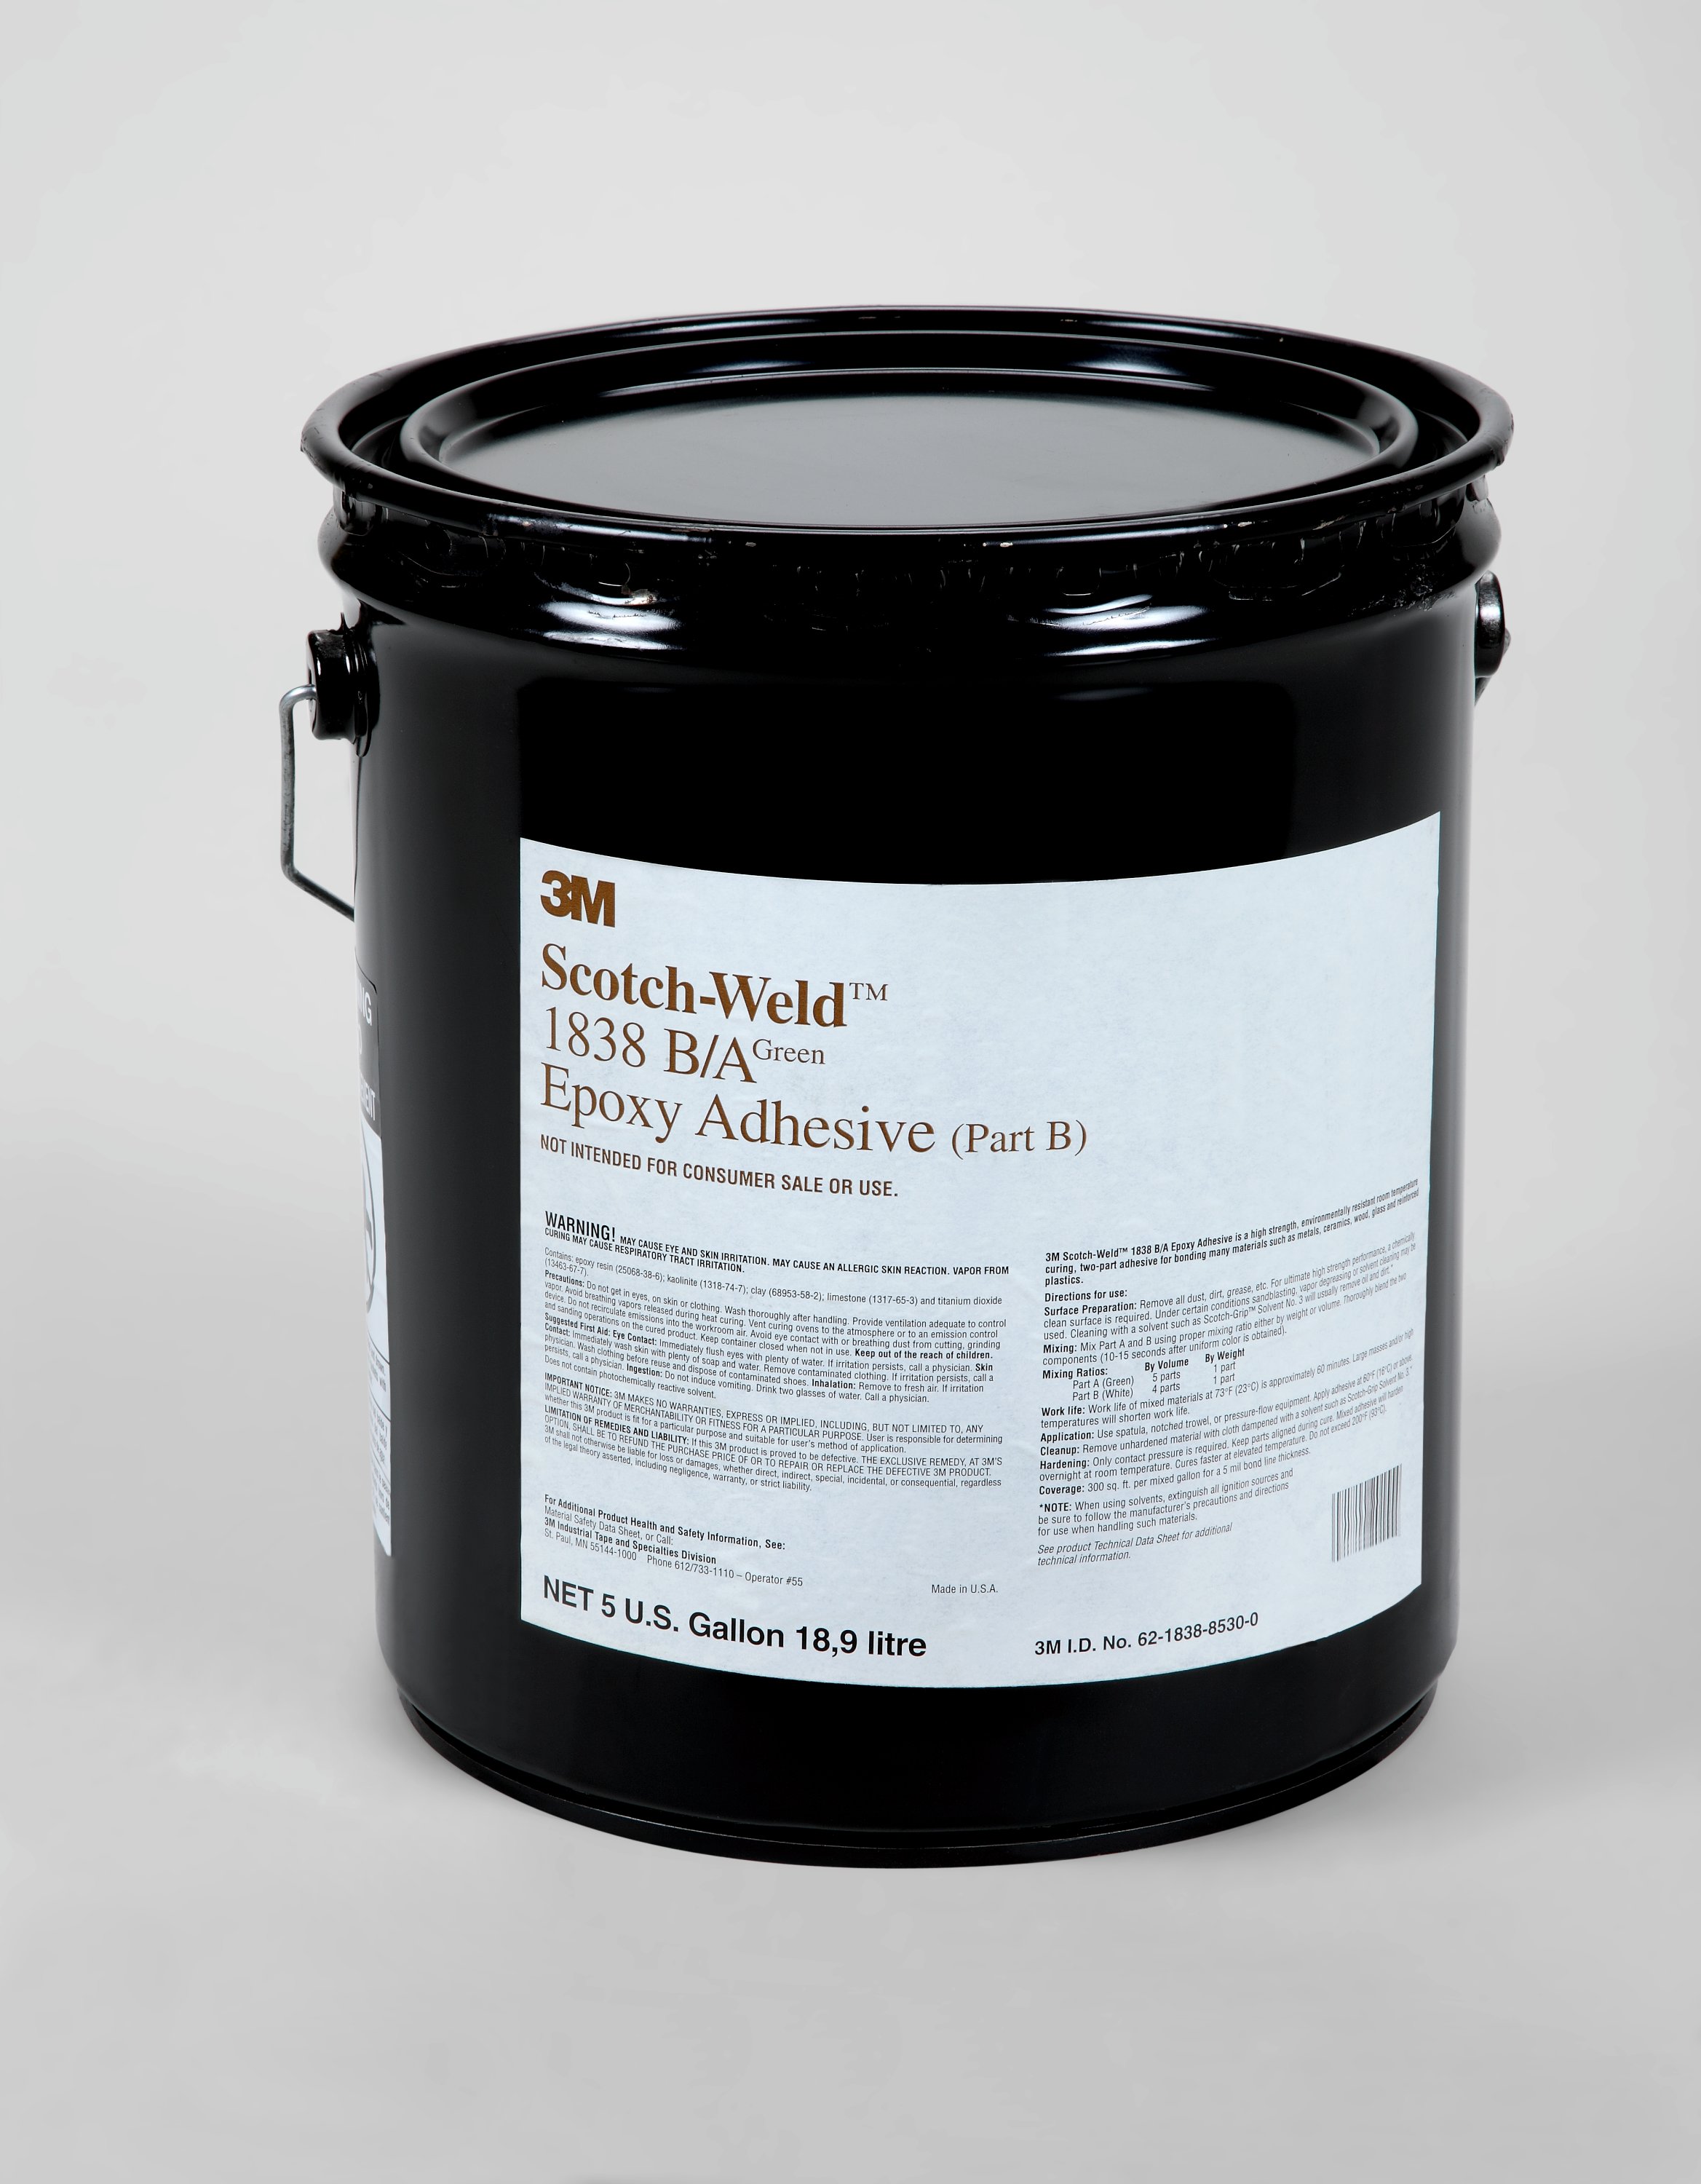 3M™ Scotch-Weld™ Epoxy Adhesive 1838 is a controlled-flow product with high viscosity which allows for easy dispensing and ensures application is precise, accurate and reaches the desired results.